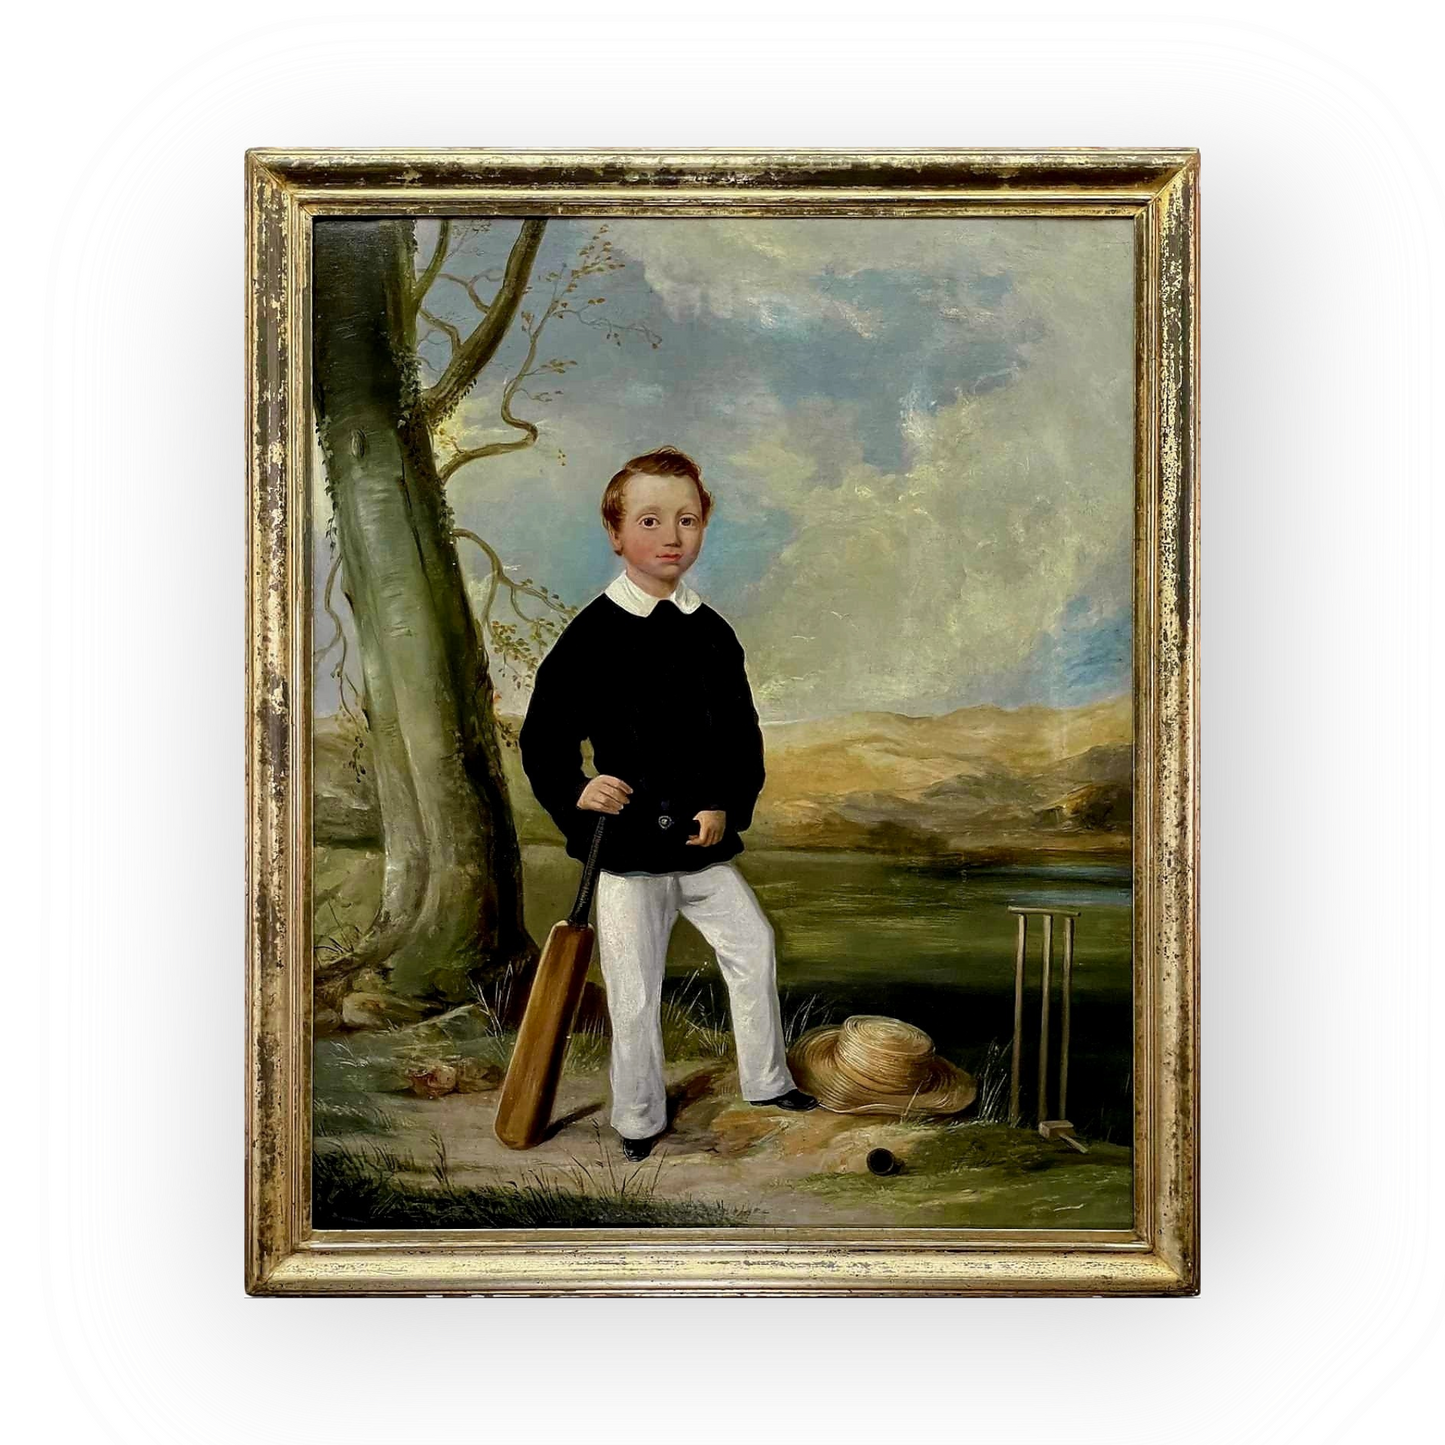 Large Mid-19th Century English Antique Oil on Canvas Entitled "The Young Cricketer" Signed "W.J.Chapman" & Dated "1856"